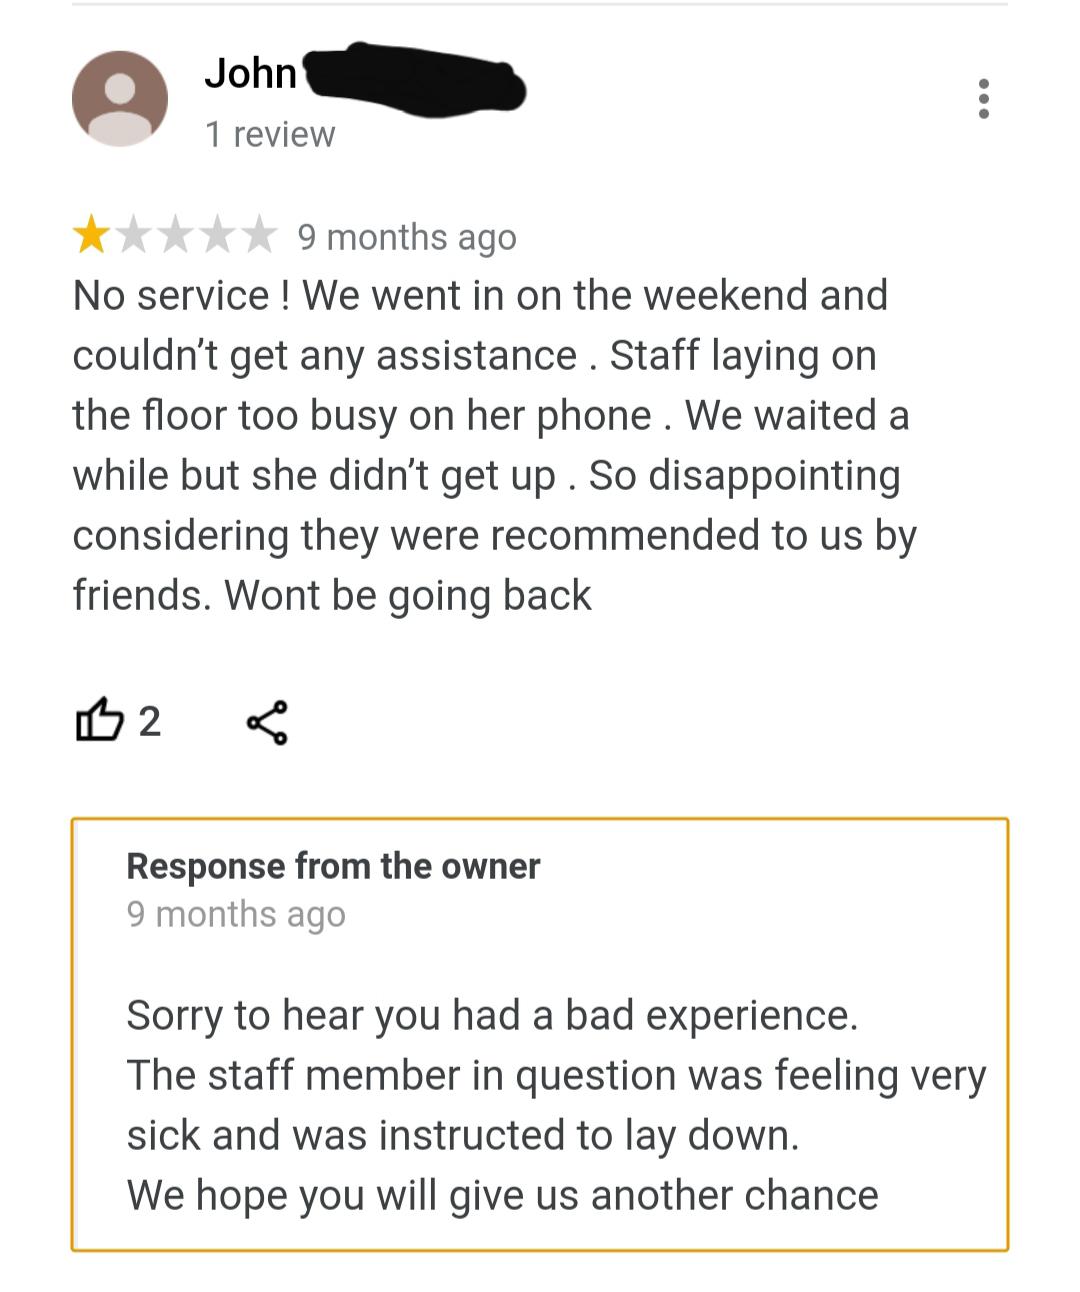 angle - John 1 review 9 months ago No service! We went in on the weekend and couldn't get any assistance . Staff laying on the floor too busy on her phone. We waited a while but she didn't get up. So disappointing considering they were recommended to us b